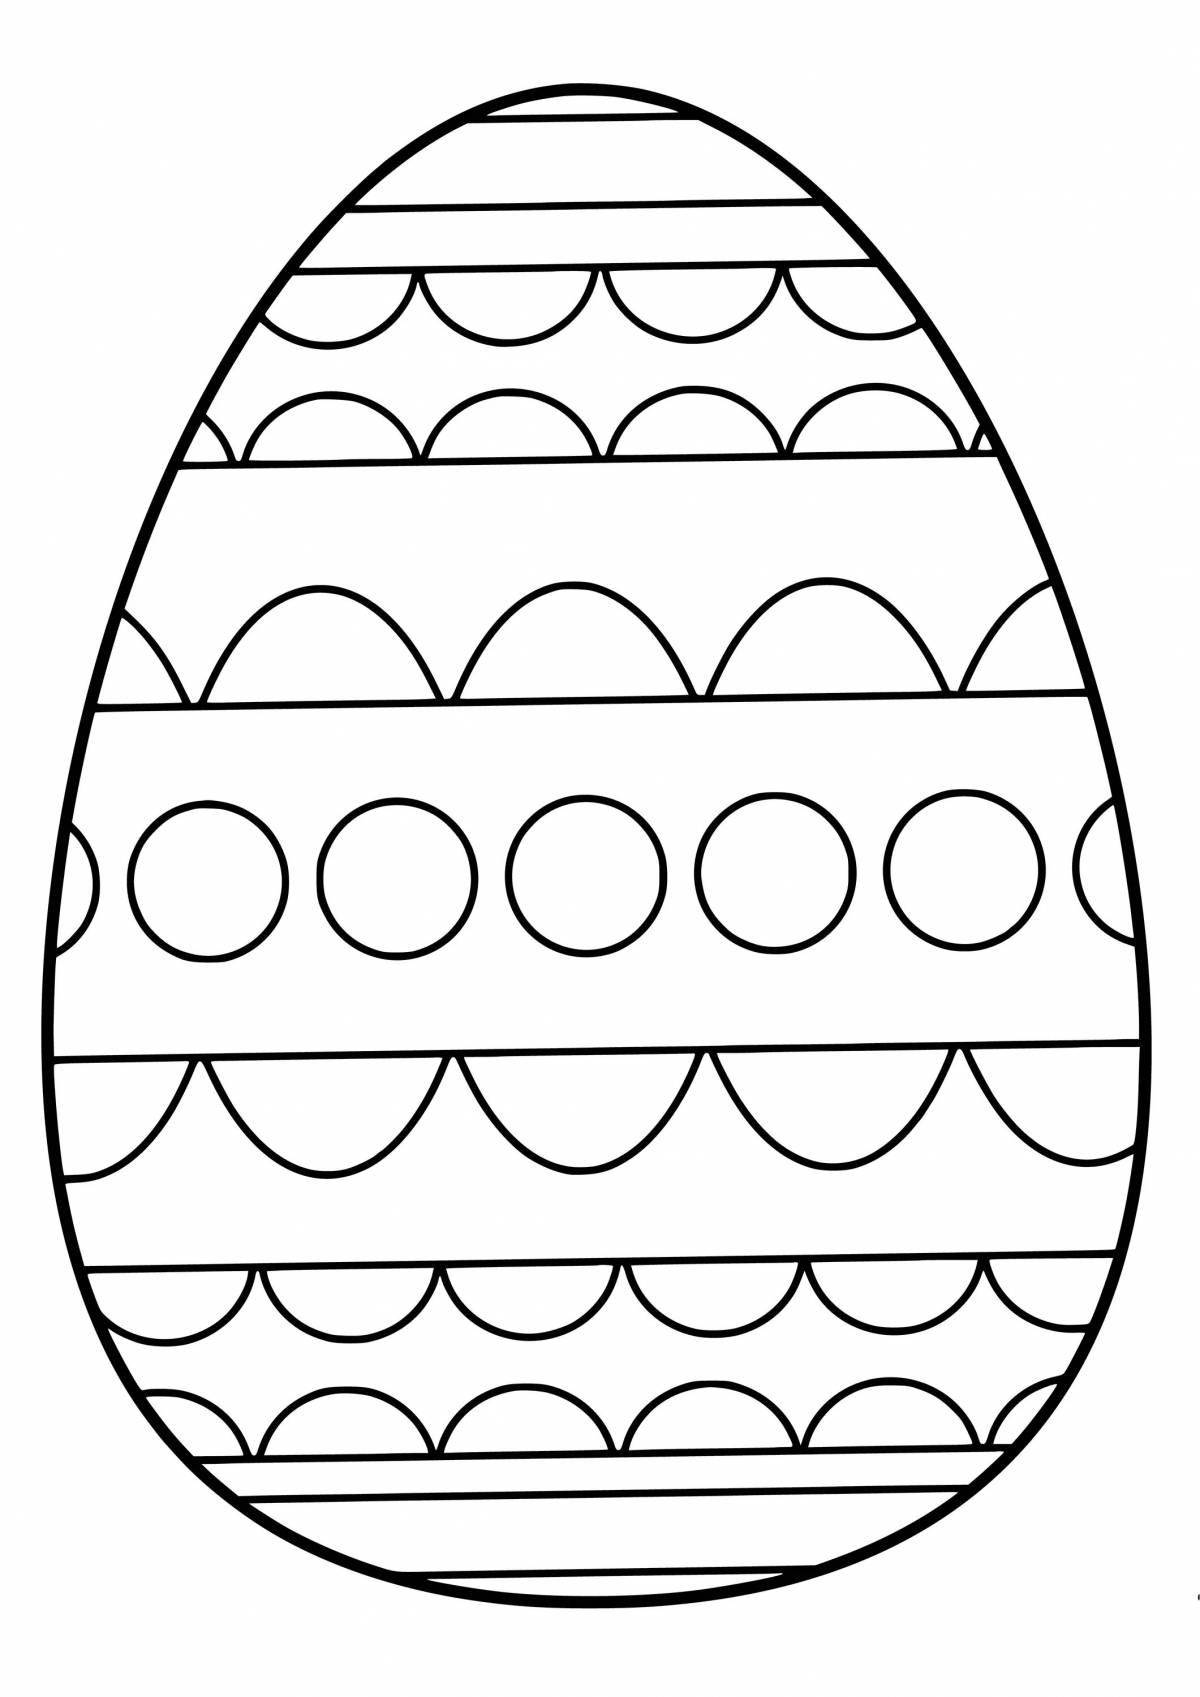 Fun chicken egg coloring page